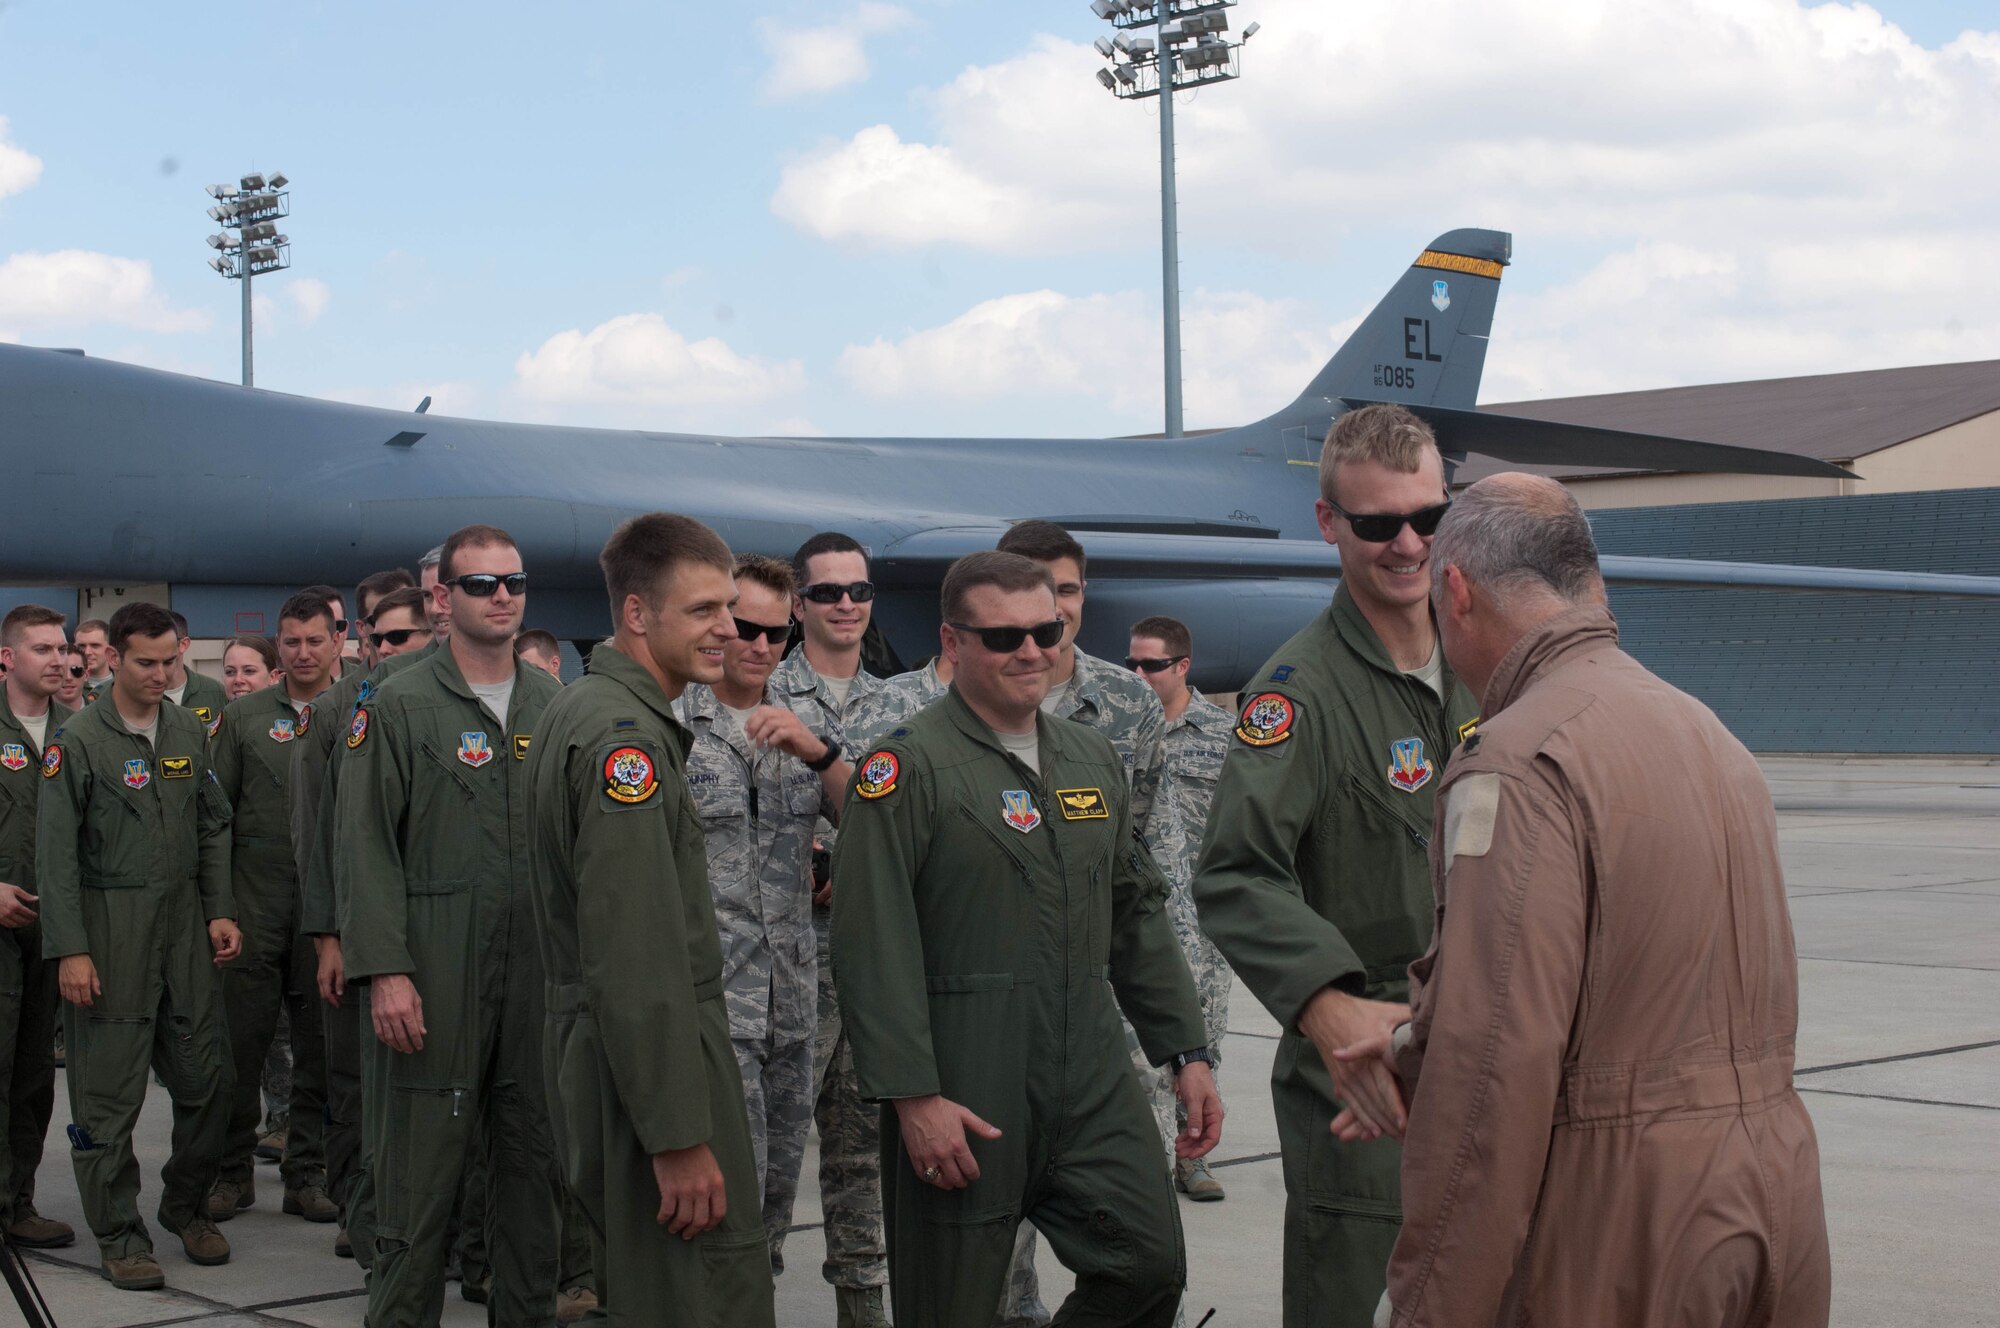 Airmen at Ellsworth Air Force Base, S.D., congratulate Lt. Col. Timothy Schepper, 28th Operations Group senior evaluator, on being the first person to achieve 5,000 hours flying B-1 bombers, July 15, 2013. Schepper reached the milestone during a 19 – hour mission that originated in Southwest Asia. (U.S. Air Force photo by Airman 1st Class Zachary Hada/Released)